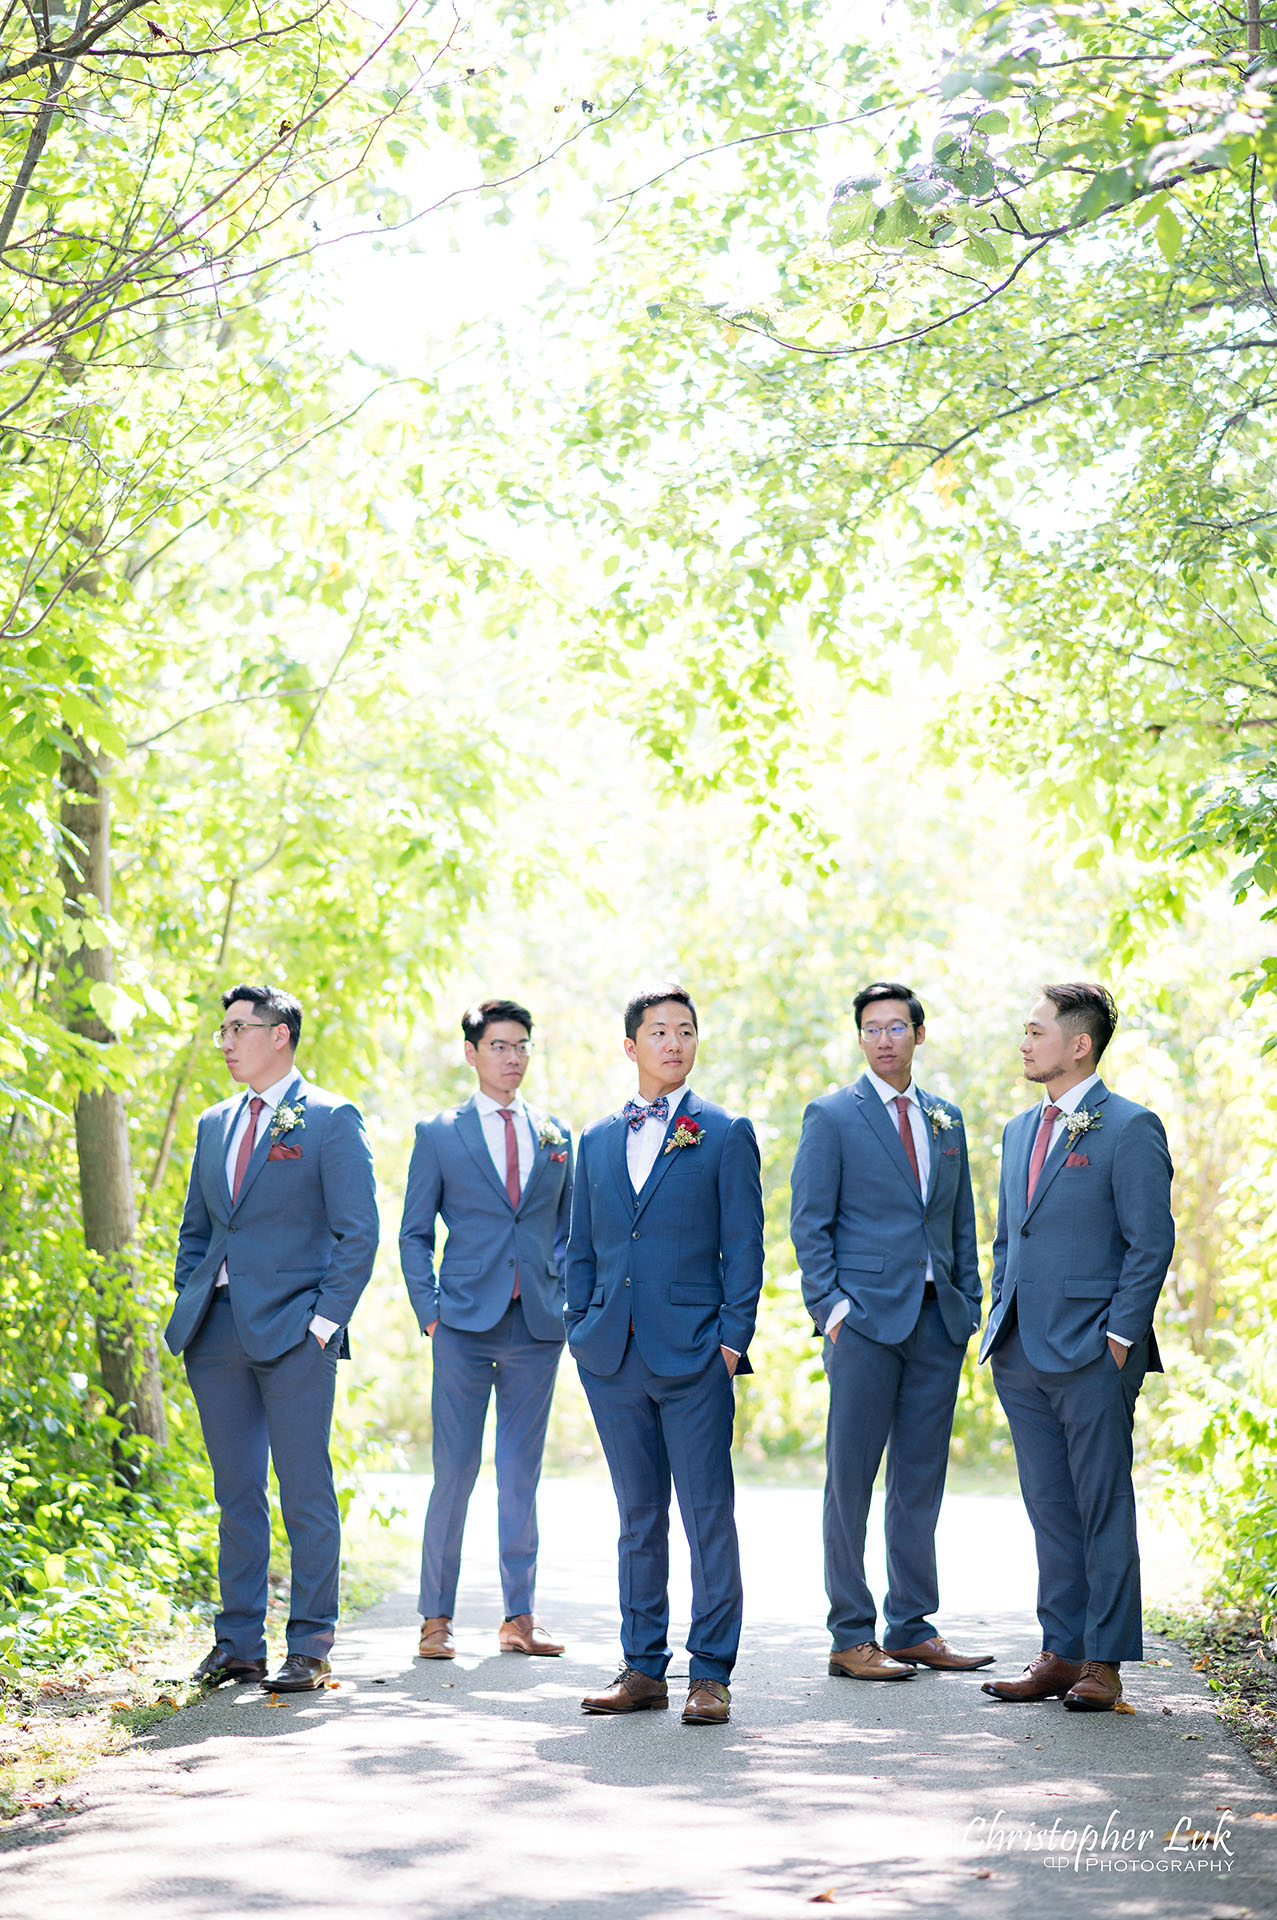 Christopher Luk Toronto Wedding Photographer Bridle Trail Baptist Church Unionville Main Street Crystal Fountain Event Venue Bride Groom Natural Photojournalistic Candid Creative Portrait Session Pictures Forest Best Man Groomsmen Stylish Boy Band Cool